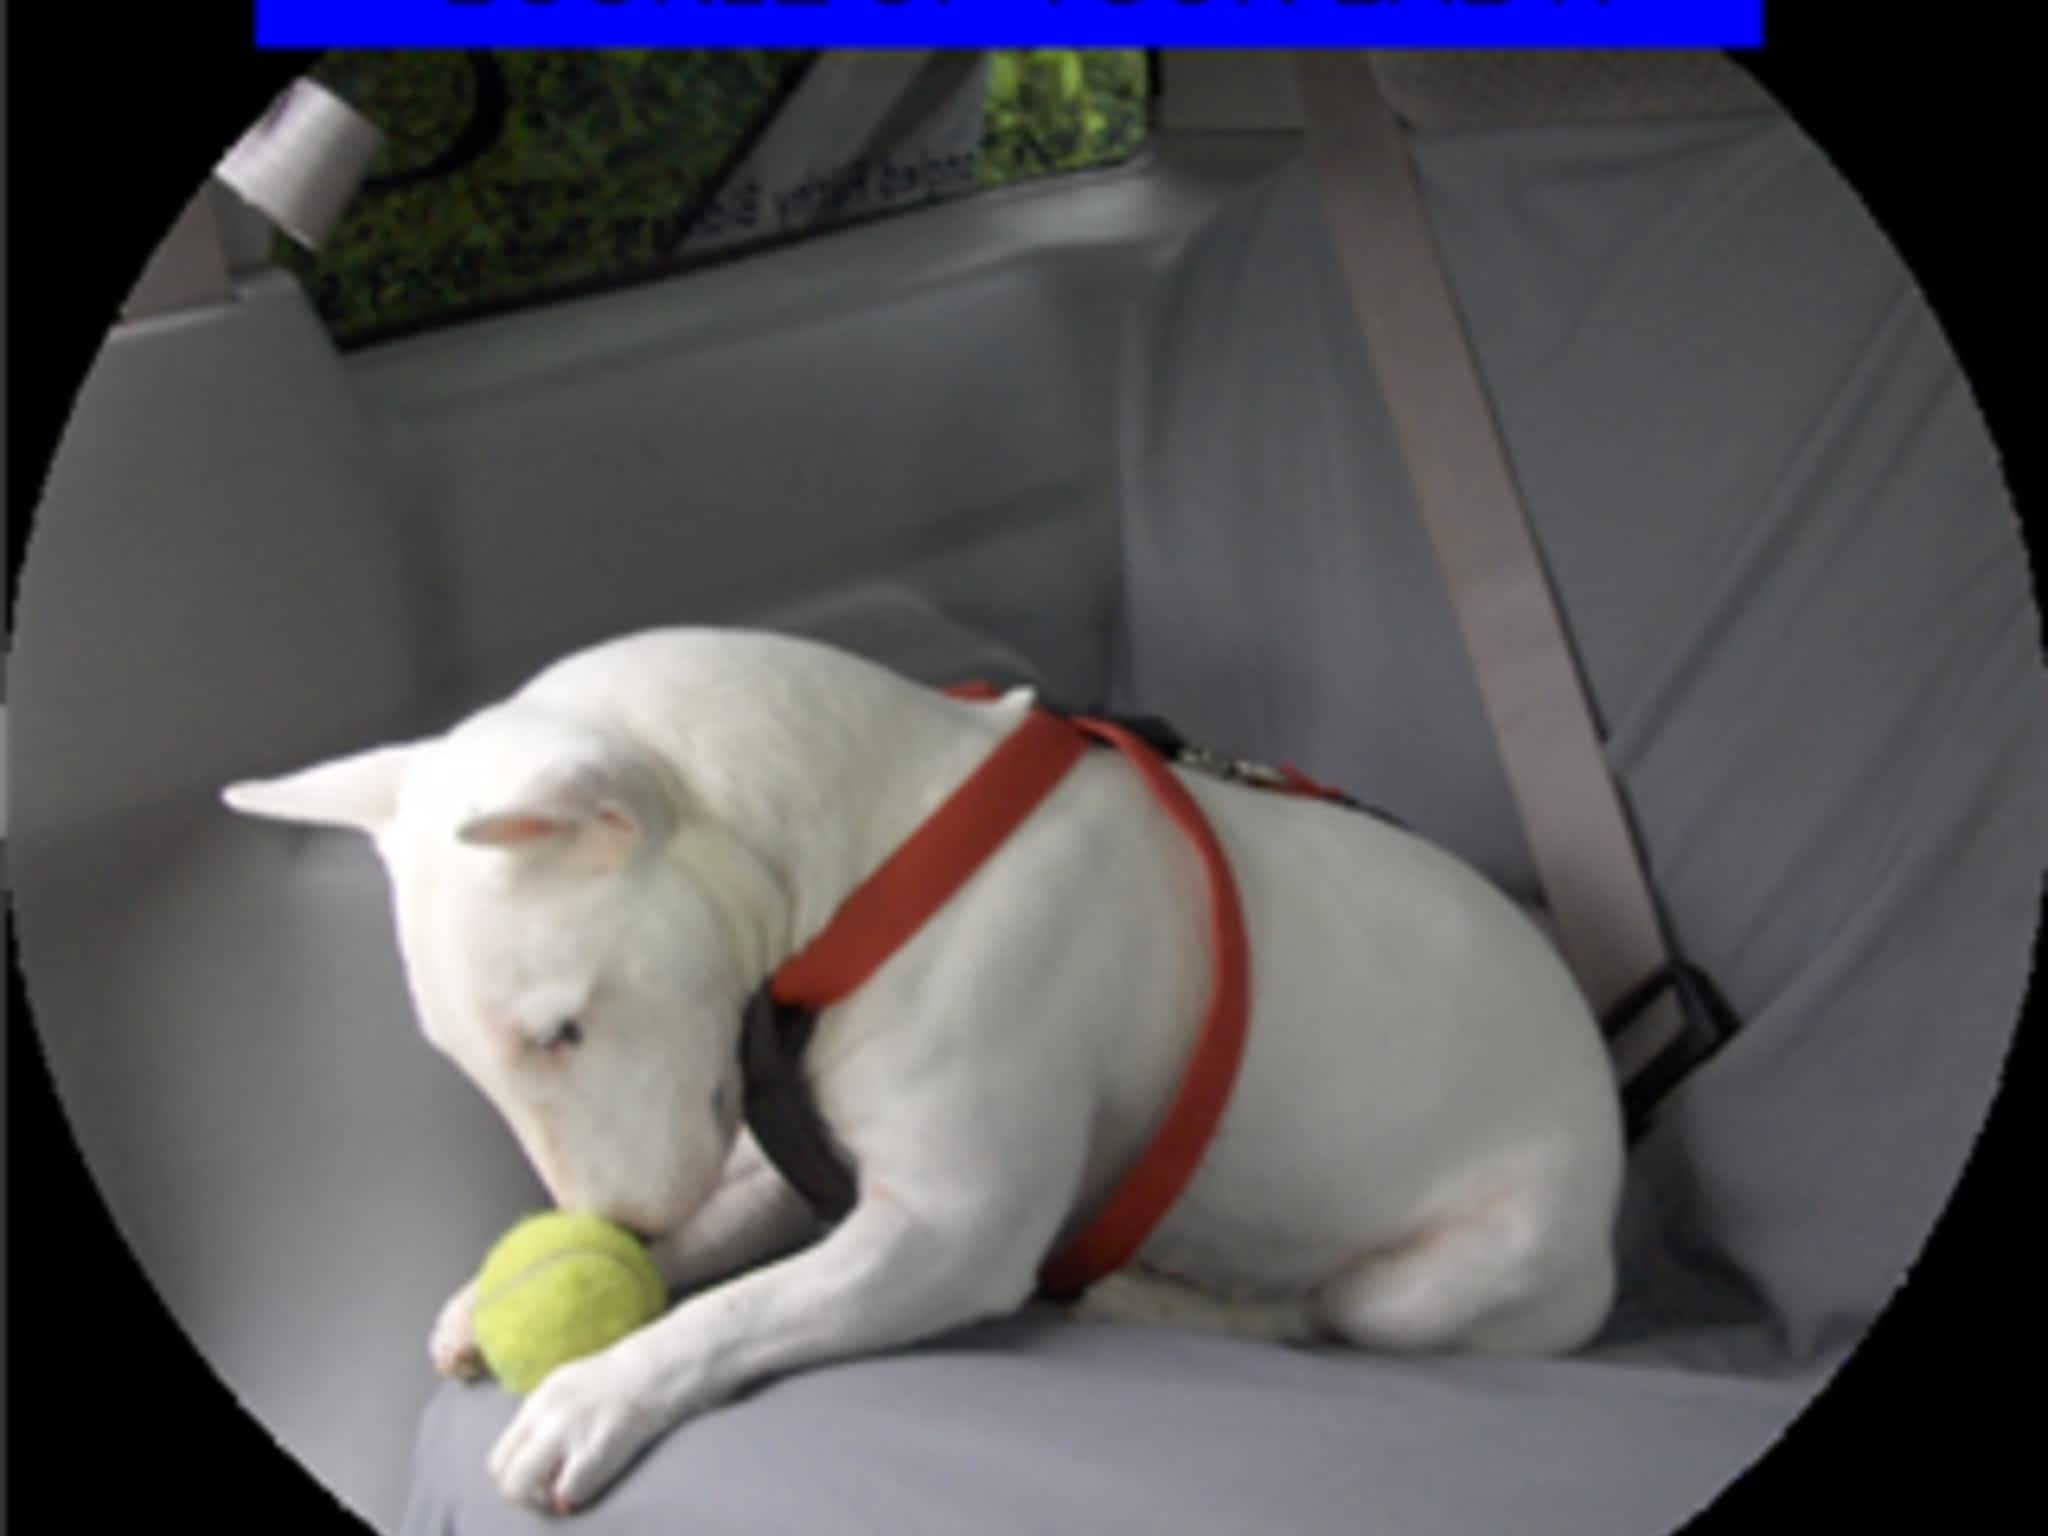 photo Soggy Dog Car Seat Covers